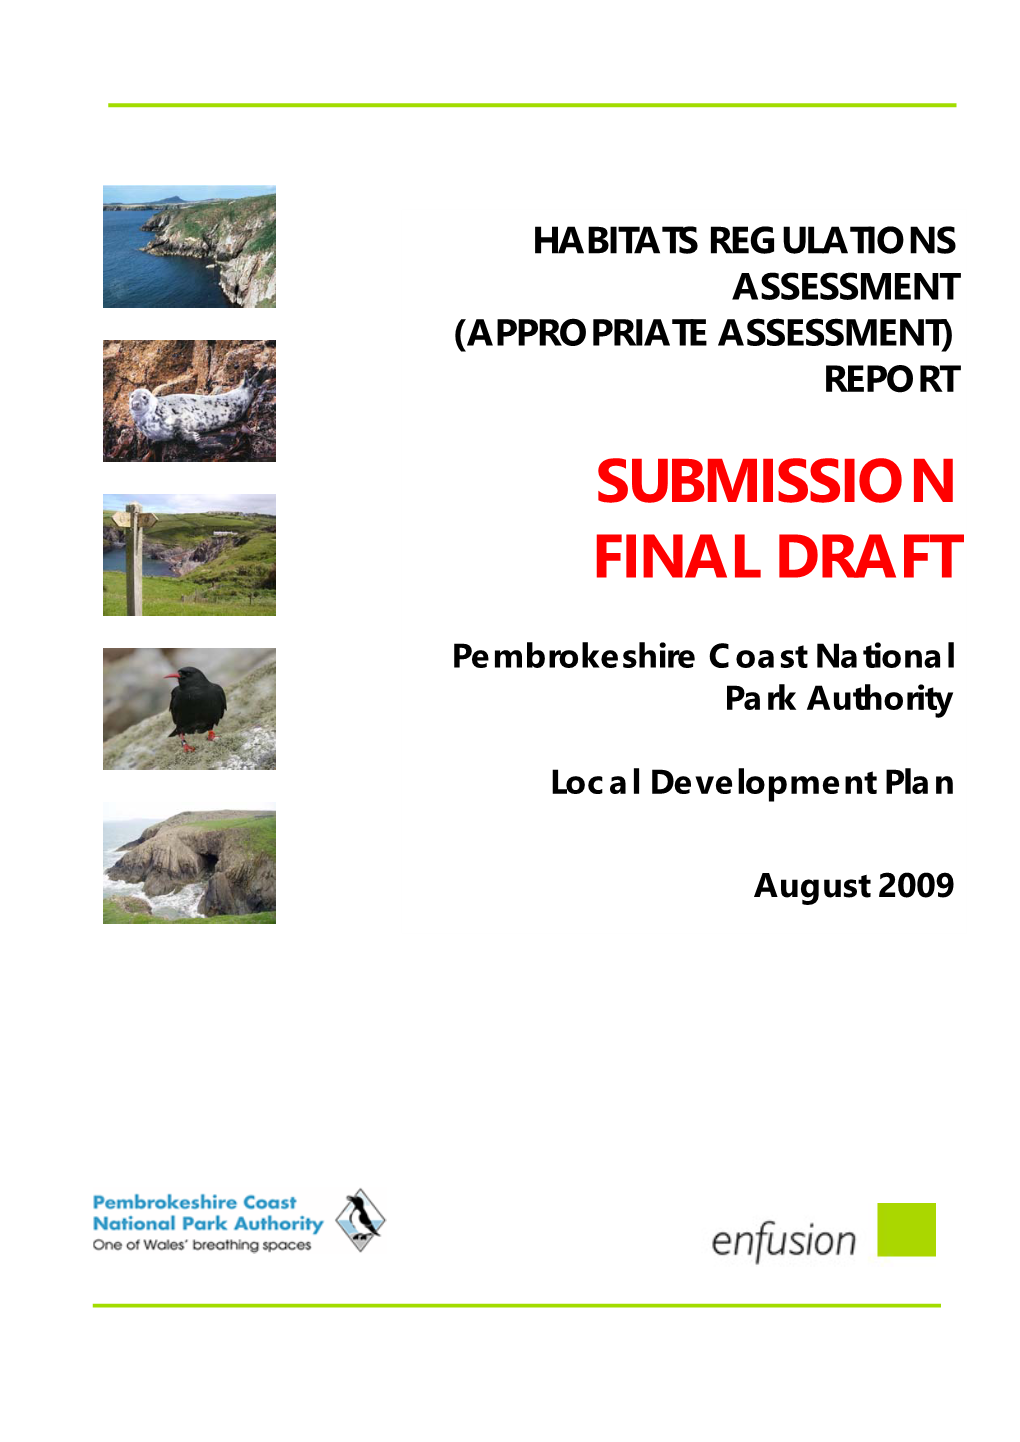 Submission Final Draft